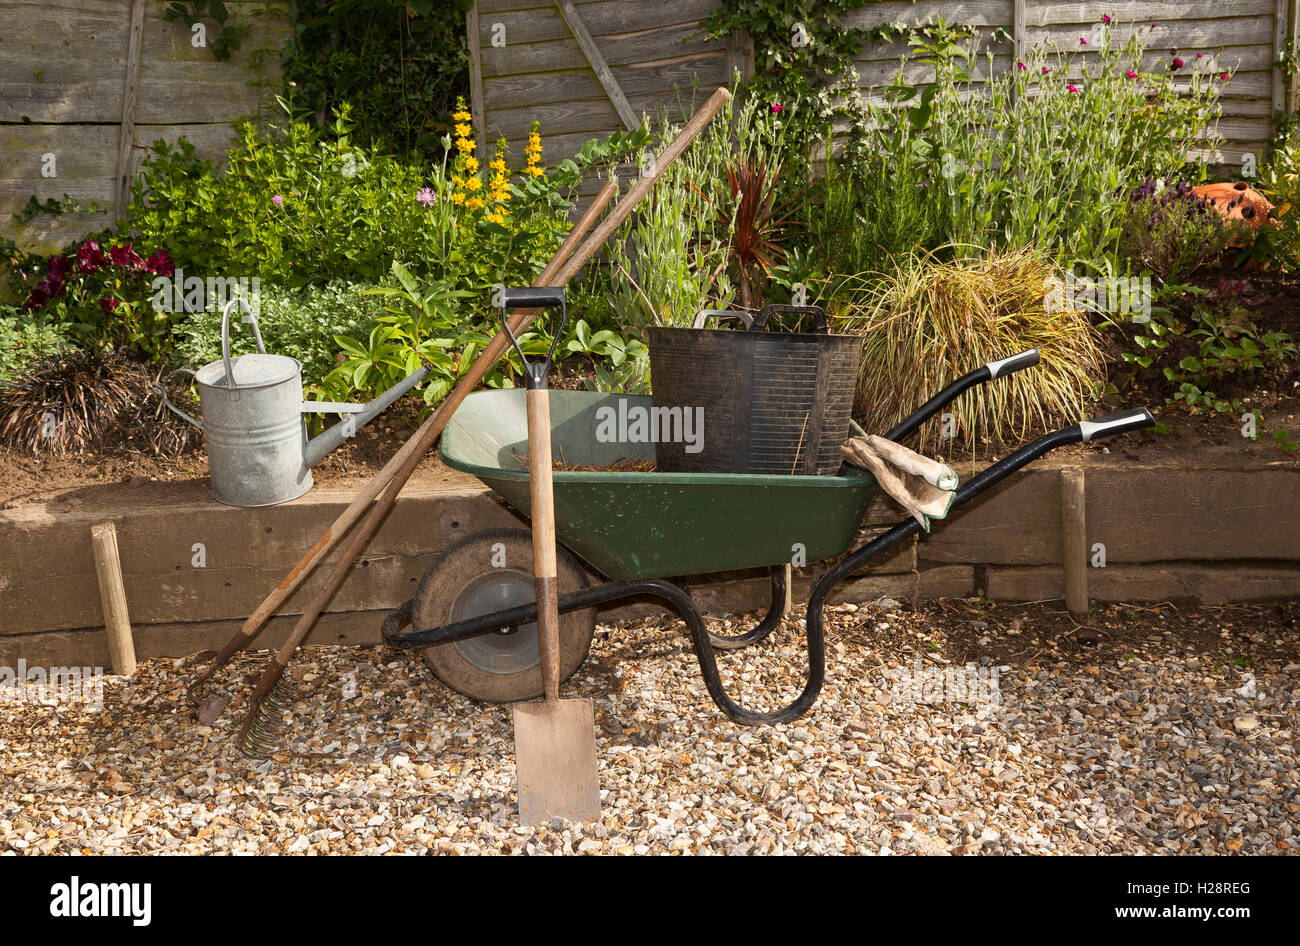 A wheelbarrow and garden tools and a small raised bed Stock Photo